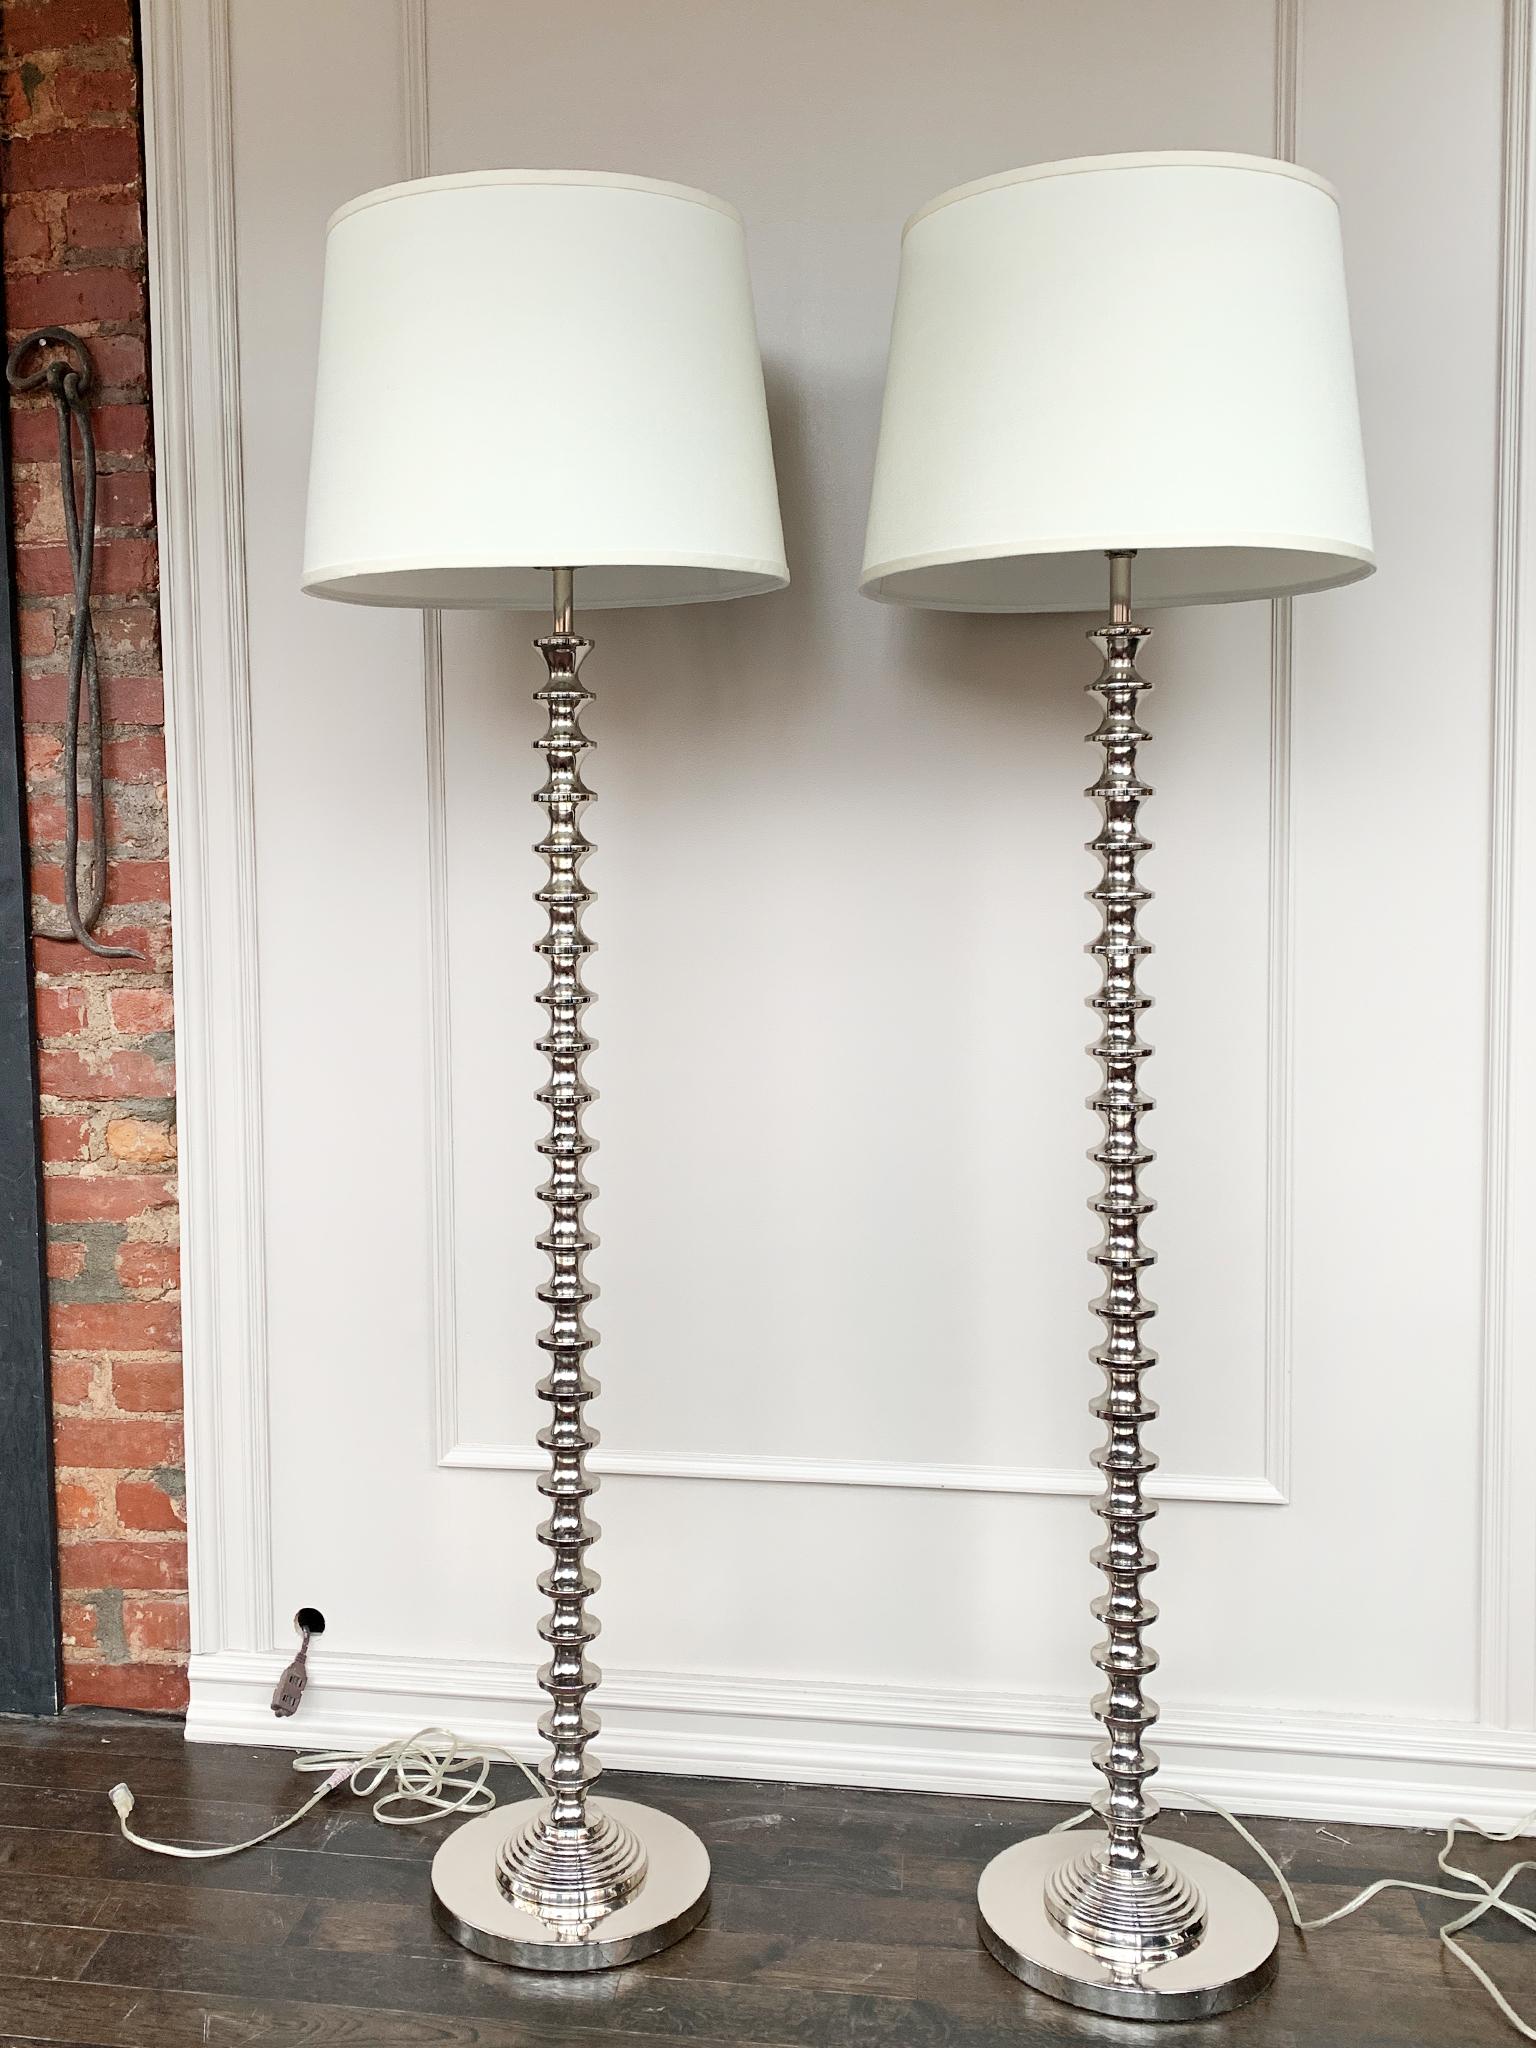 These chrome floor lamps are a modern take on the turned wood spool lamp. Newly rewired, single bulb socket. Paired with new linen shades.

Dimensions:
64 in. height
11.5 in. base diameter
18 in. shade diameter

Condition notes:
In good